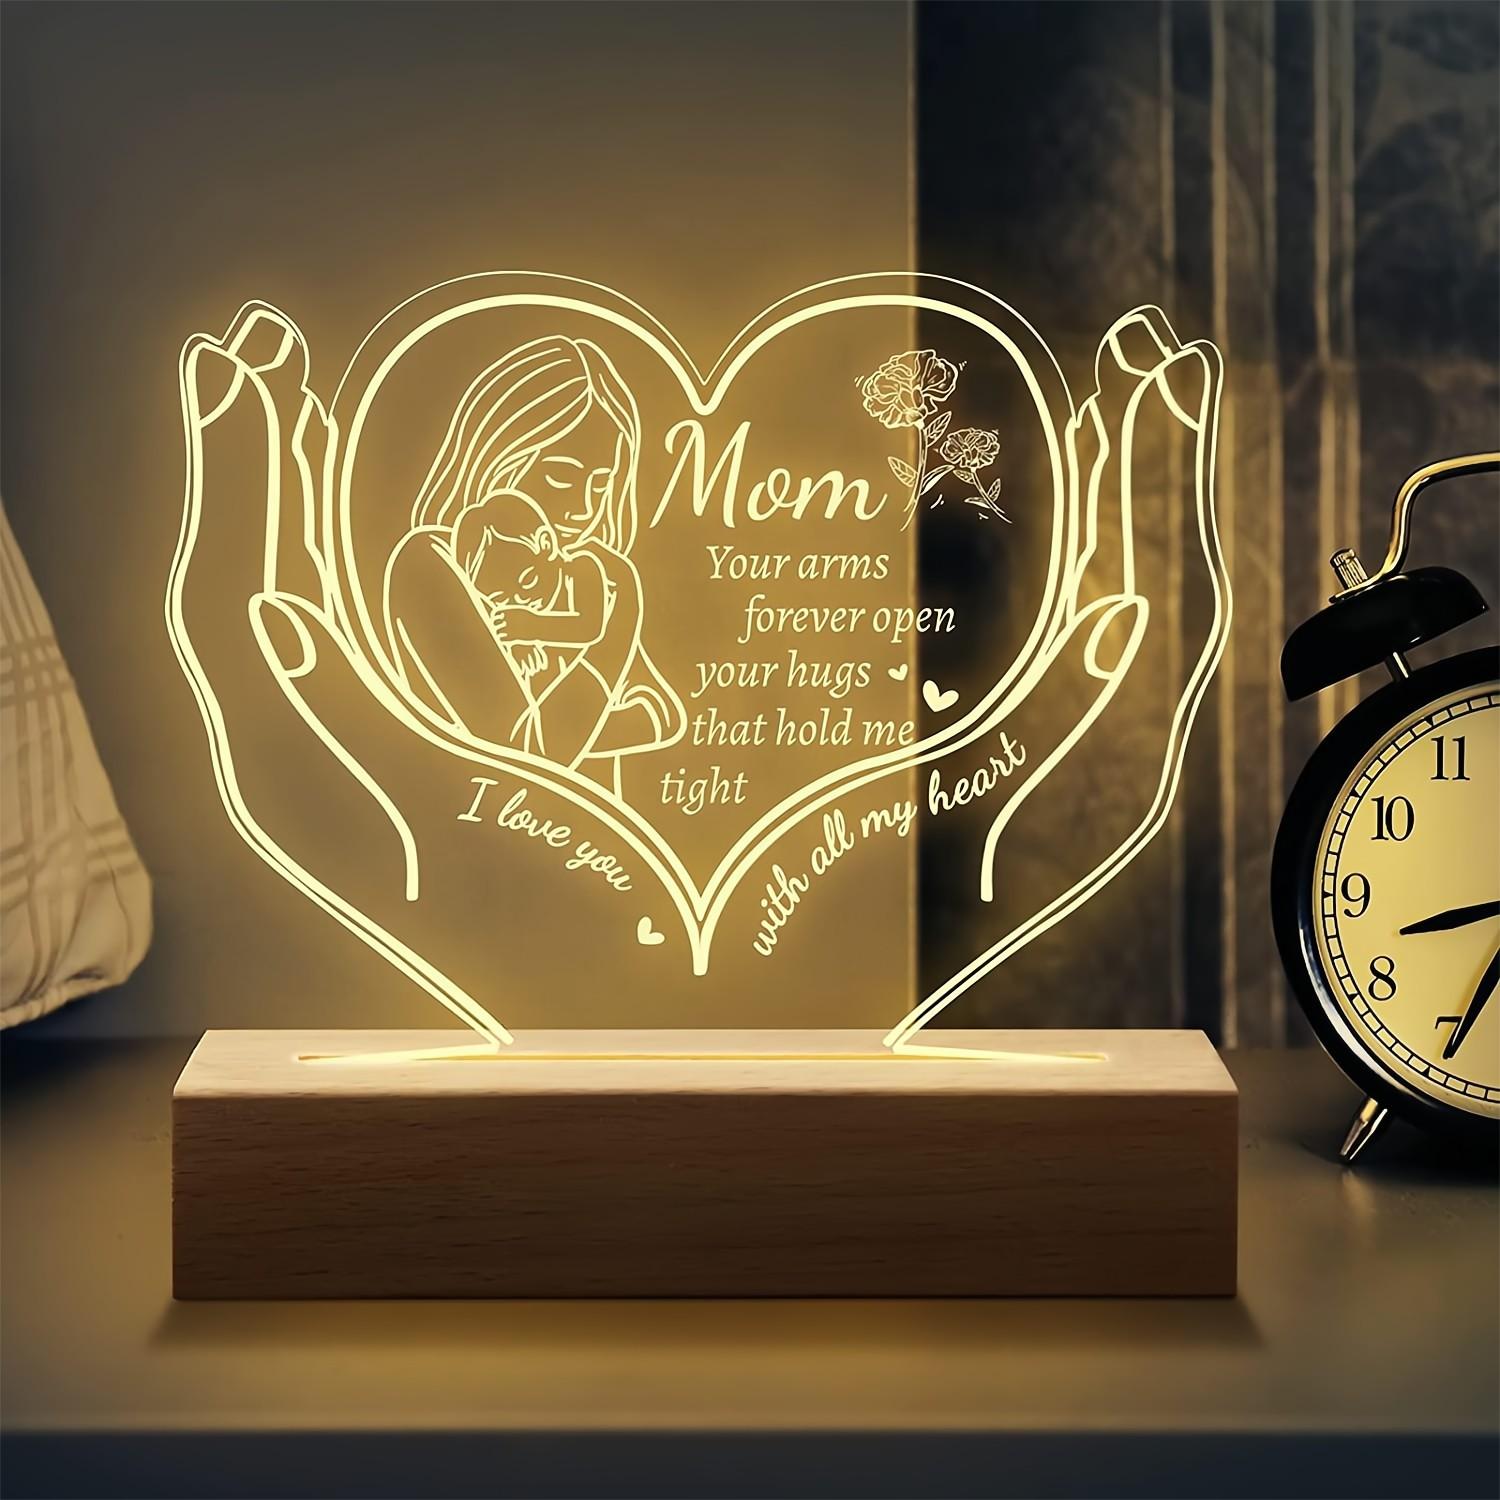 https://img.kwcdn.com/product/personalized-acrylic-night-lights/d69d2f15w98k18-e1d11dbb/open/2023-02-27/1677463952466-70db1ac608774f6f8169b3f115d568bc-goods.jpeg